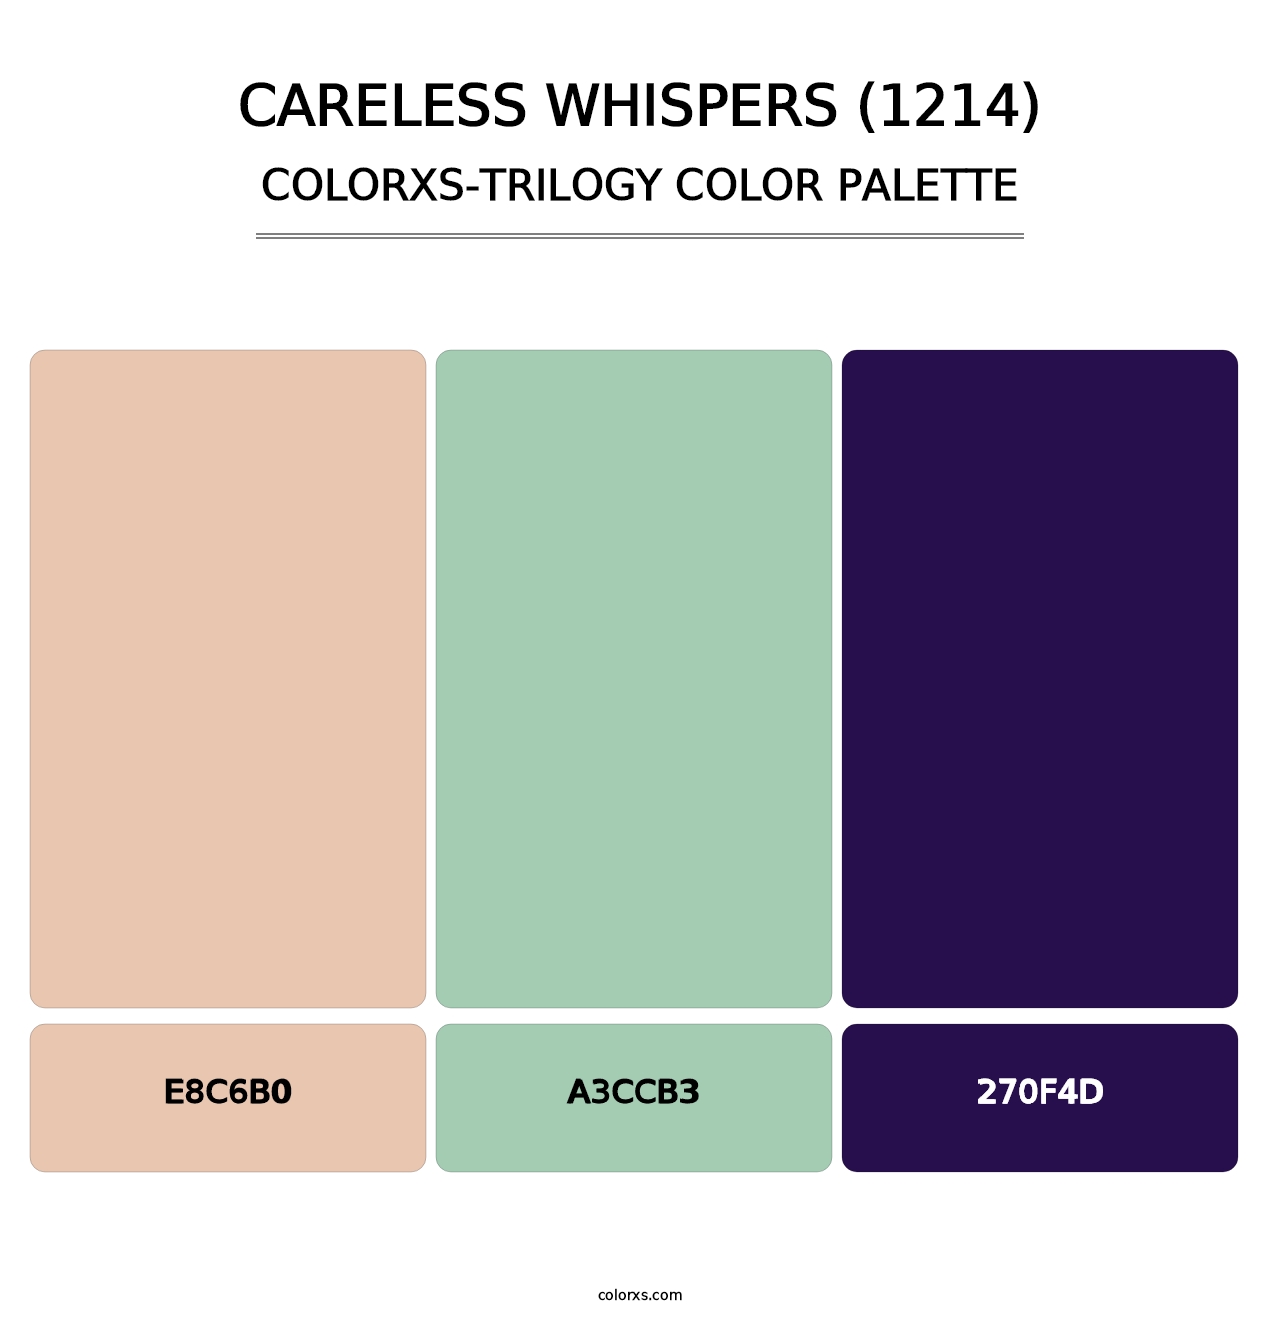 Careless Whispers (1214) - Colorxs Trilogy Palette